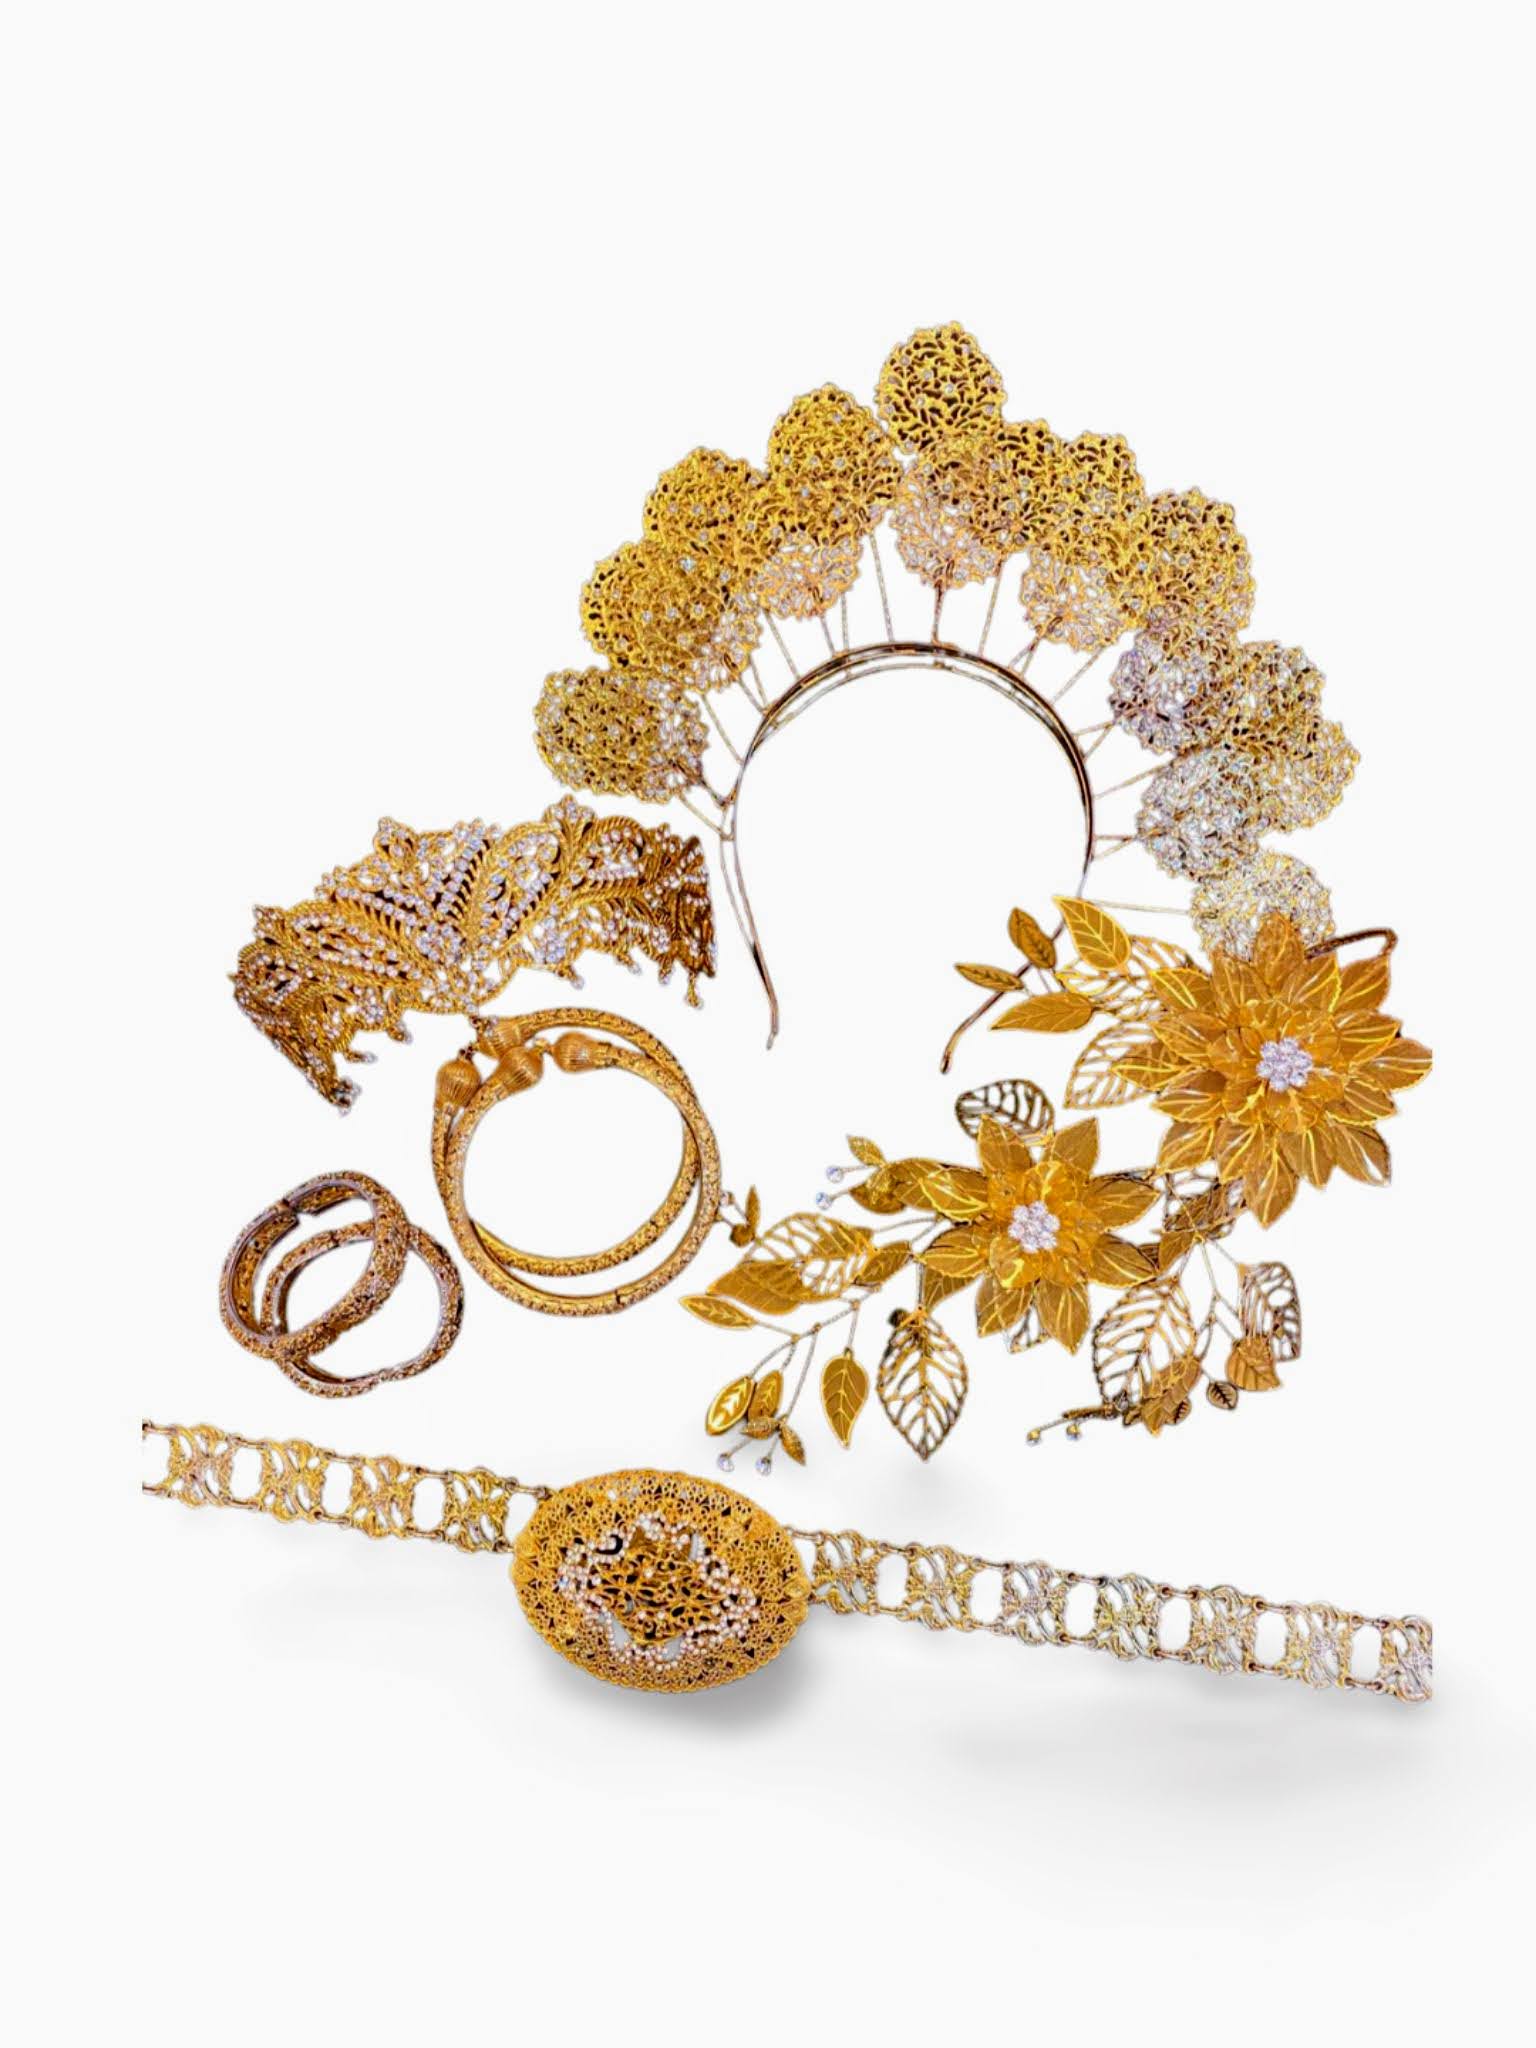 This image shows a selection of traditional Malay wedding accessories, including a Sanggul Lintang (a traditional Malay hair comb), Bunga Tangan Besi (a pair of metal bangles), Gelang Kaki (a pair of anklets), Gelang Tangan (a pair of bracelets), Tali Pinggang (a belt), and Pending (a brooch). These accessories are often worn by brides and grooms at Malay weddings, and they help to add a touch of traditional Malay culture to the wedding ceremony.